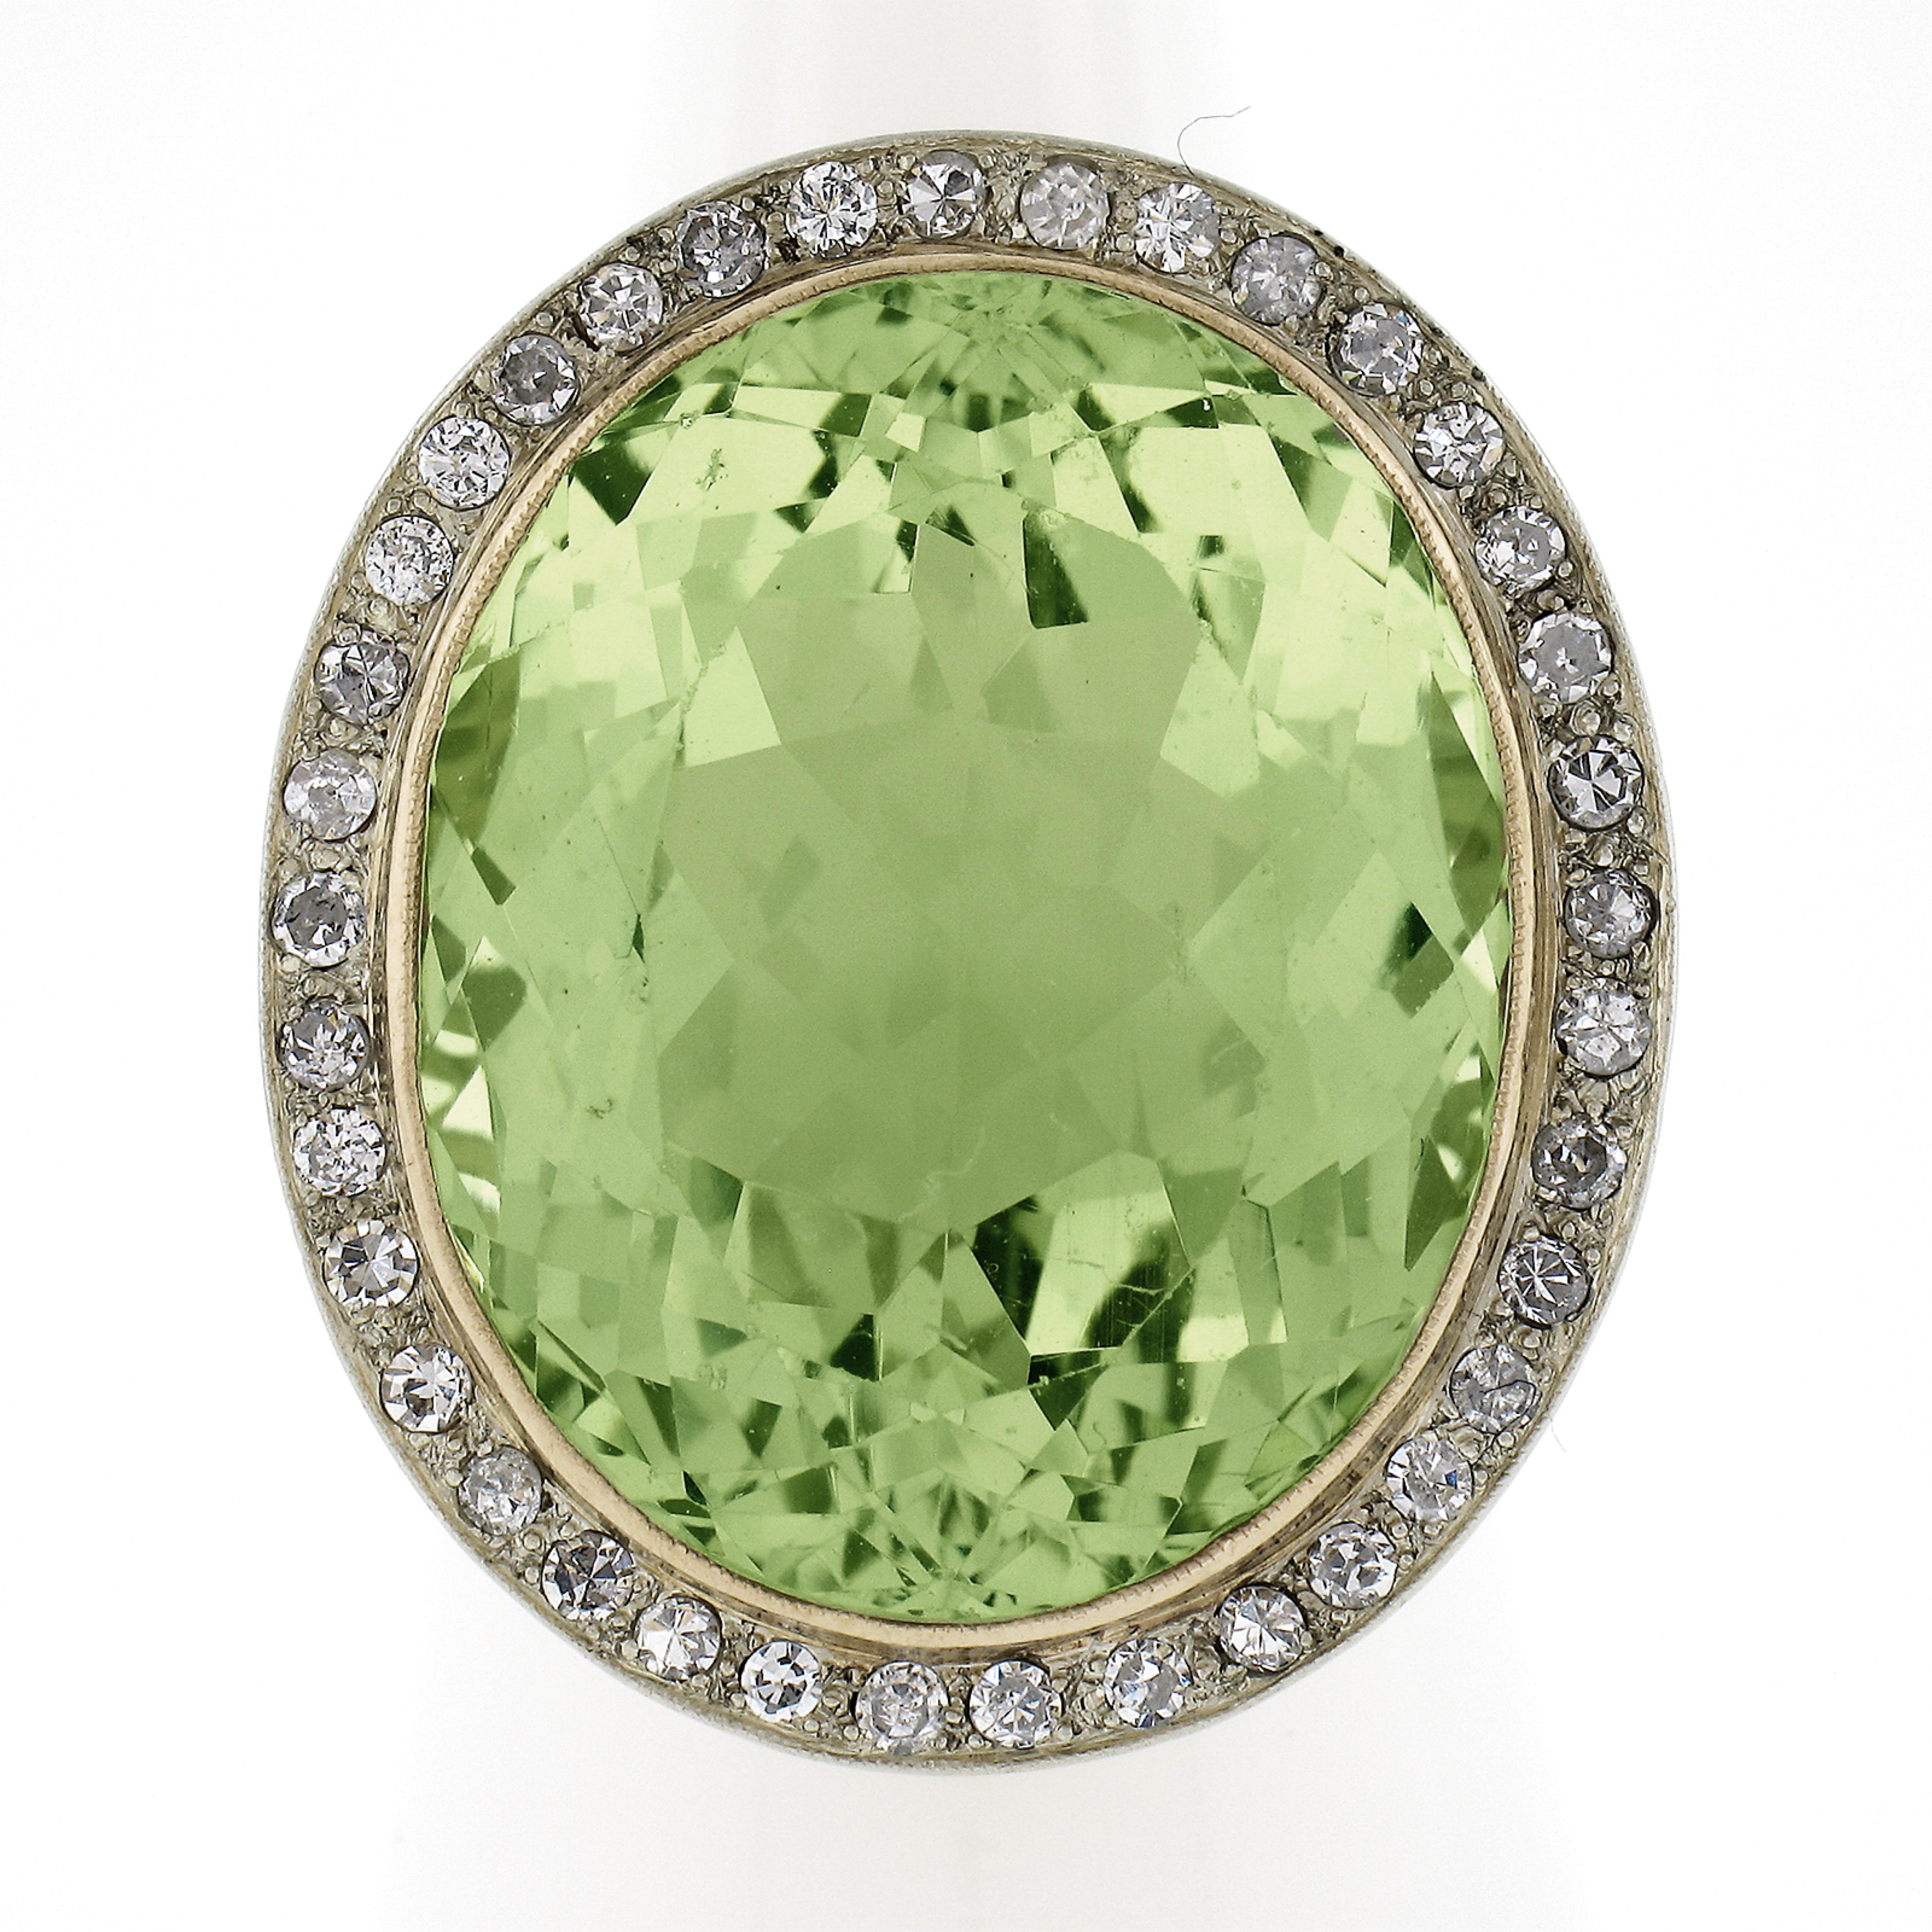 --Stone(s):--
(1) Natural Genuine Beryl - Oval Brilliant Cut - Bezel Set - Greenish Yellow Color - 40ctw (approx. based on the certification)
** See Certification Details Below for Complete Info **
(37) Natural Genuine Diamonds - Old Single Cut -